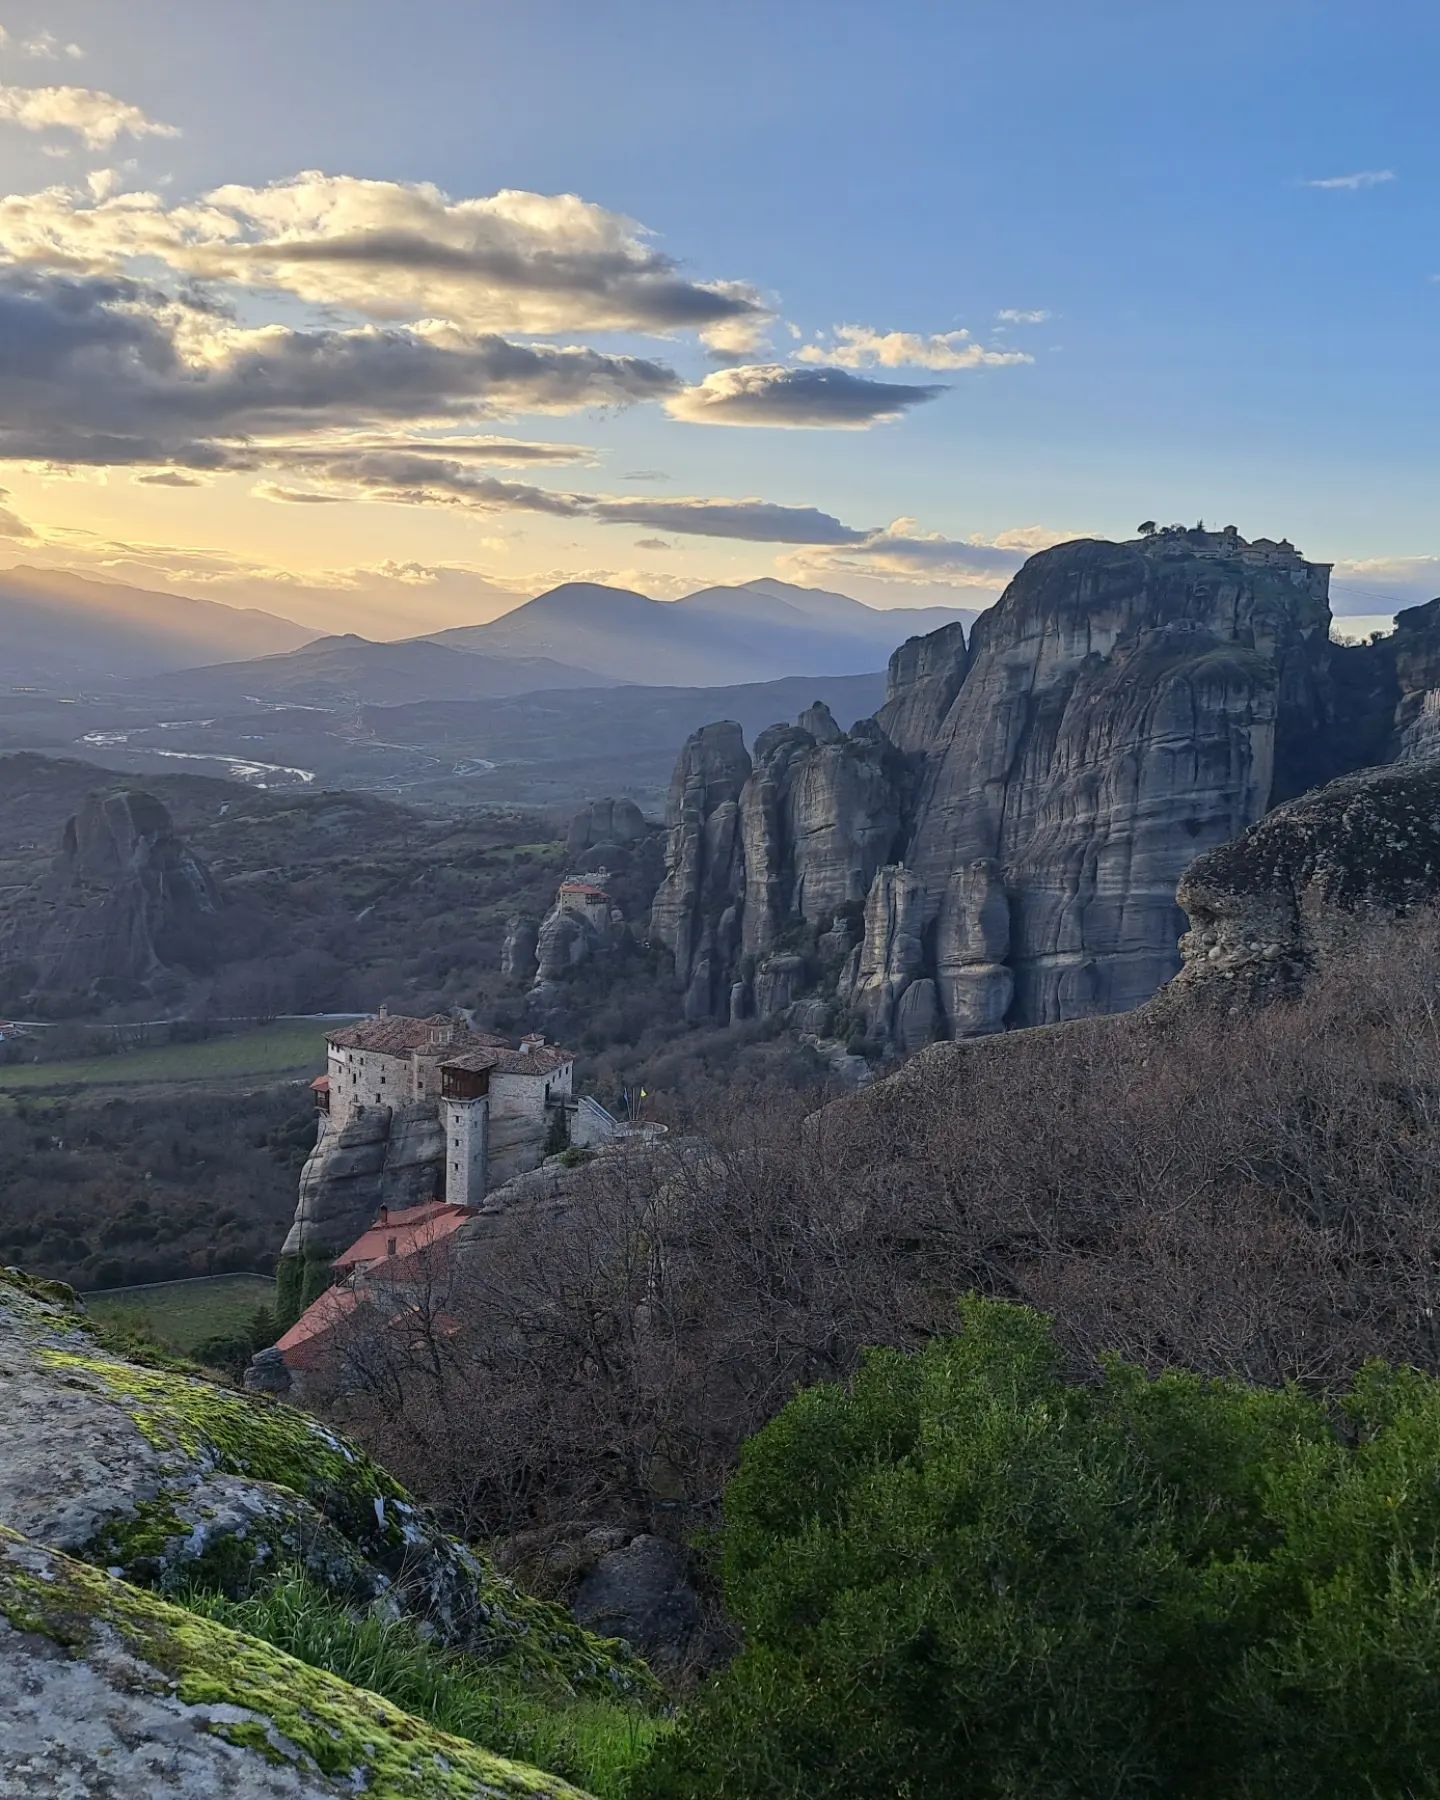 The beauty of Meteora almost makes you forget that religion is evil
#meteora #nature #travel #sunset #greece